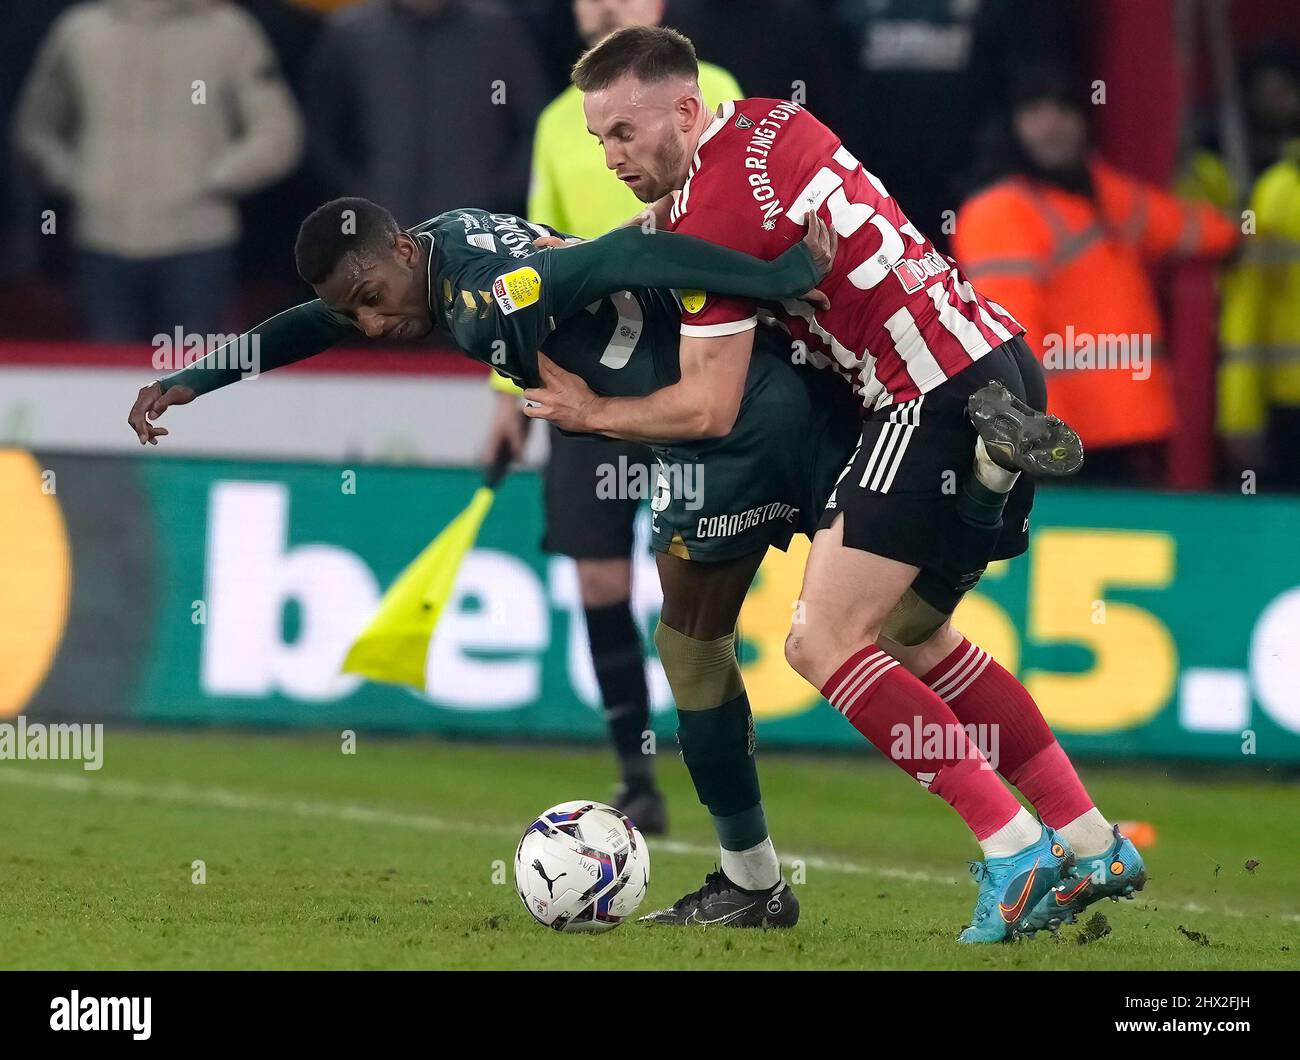 Sheffield, England, 8th March 2022. Rhys Norrington Davies of Sheffield Utd (R) challenges Isaiah Jones of Middlesbrough during the Sky Bet Championship match at Bramall Lane, Sheffield. Picture credit should read: Andrew Yates / Sportimage Stock Photo